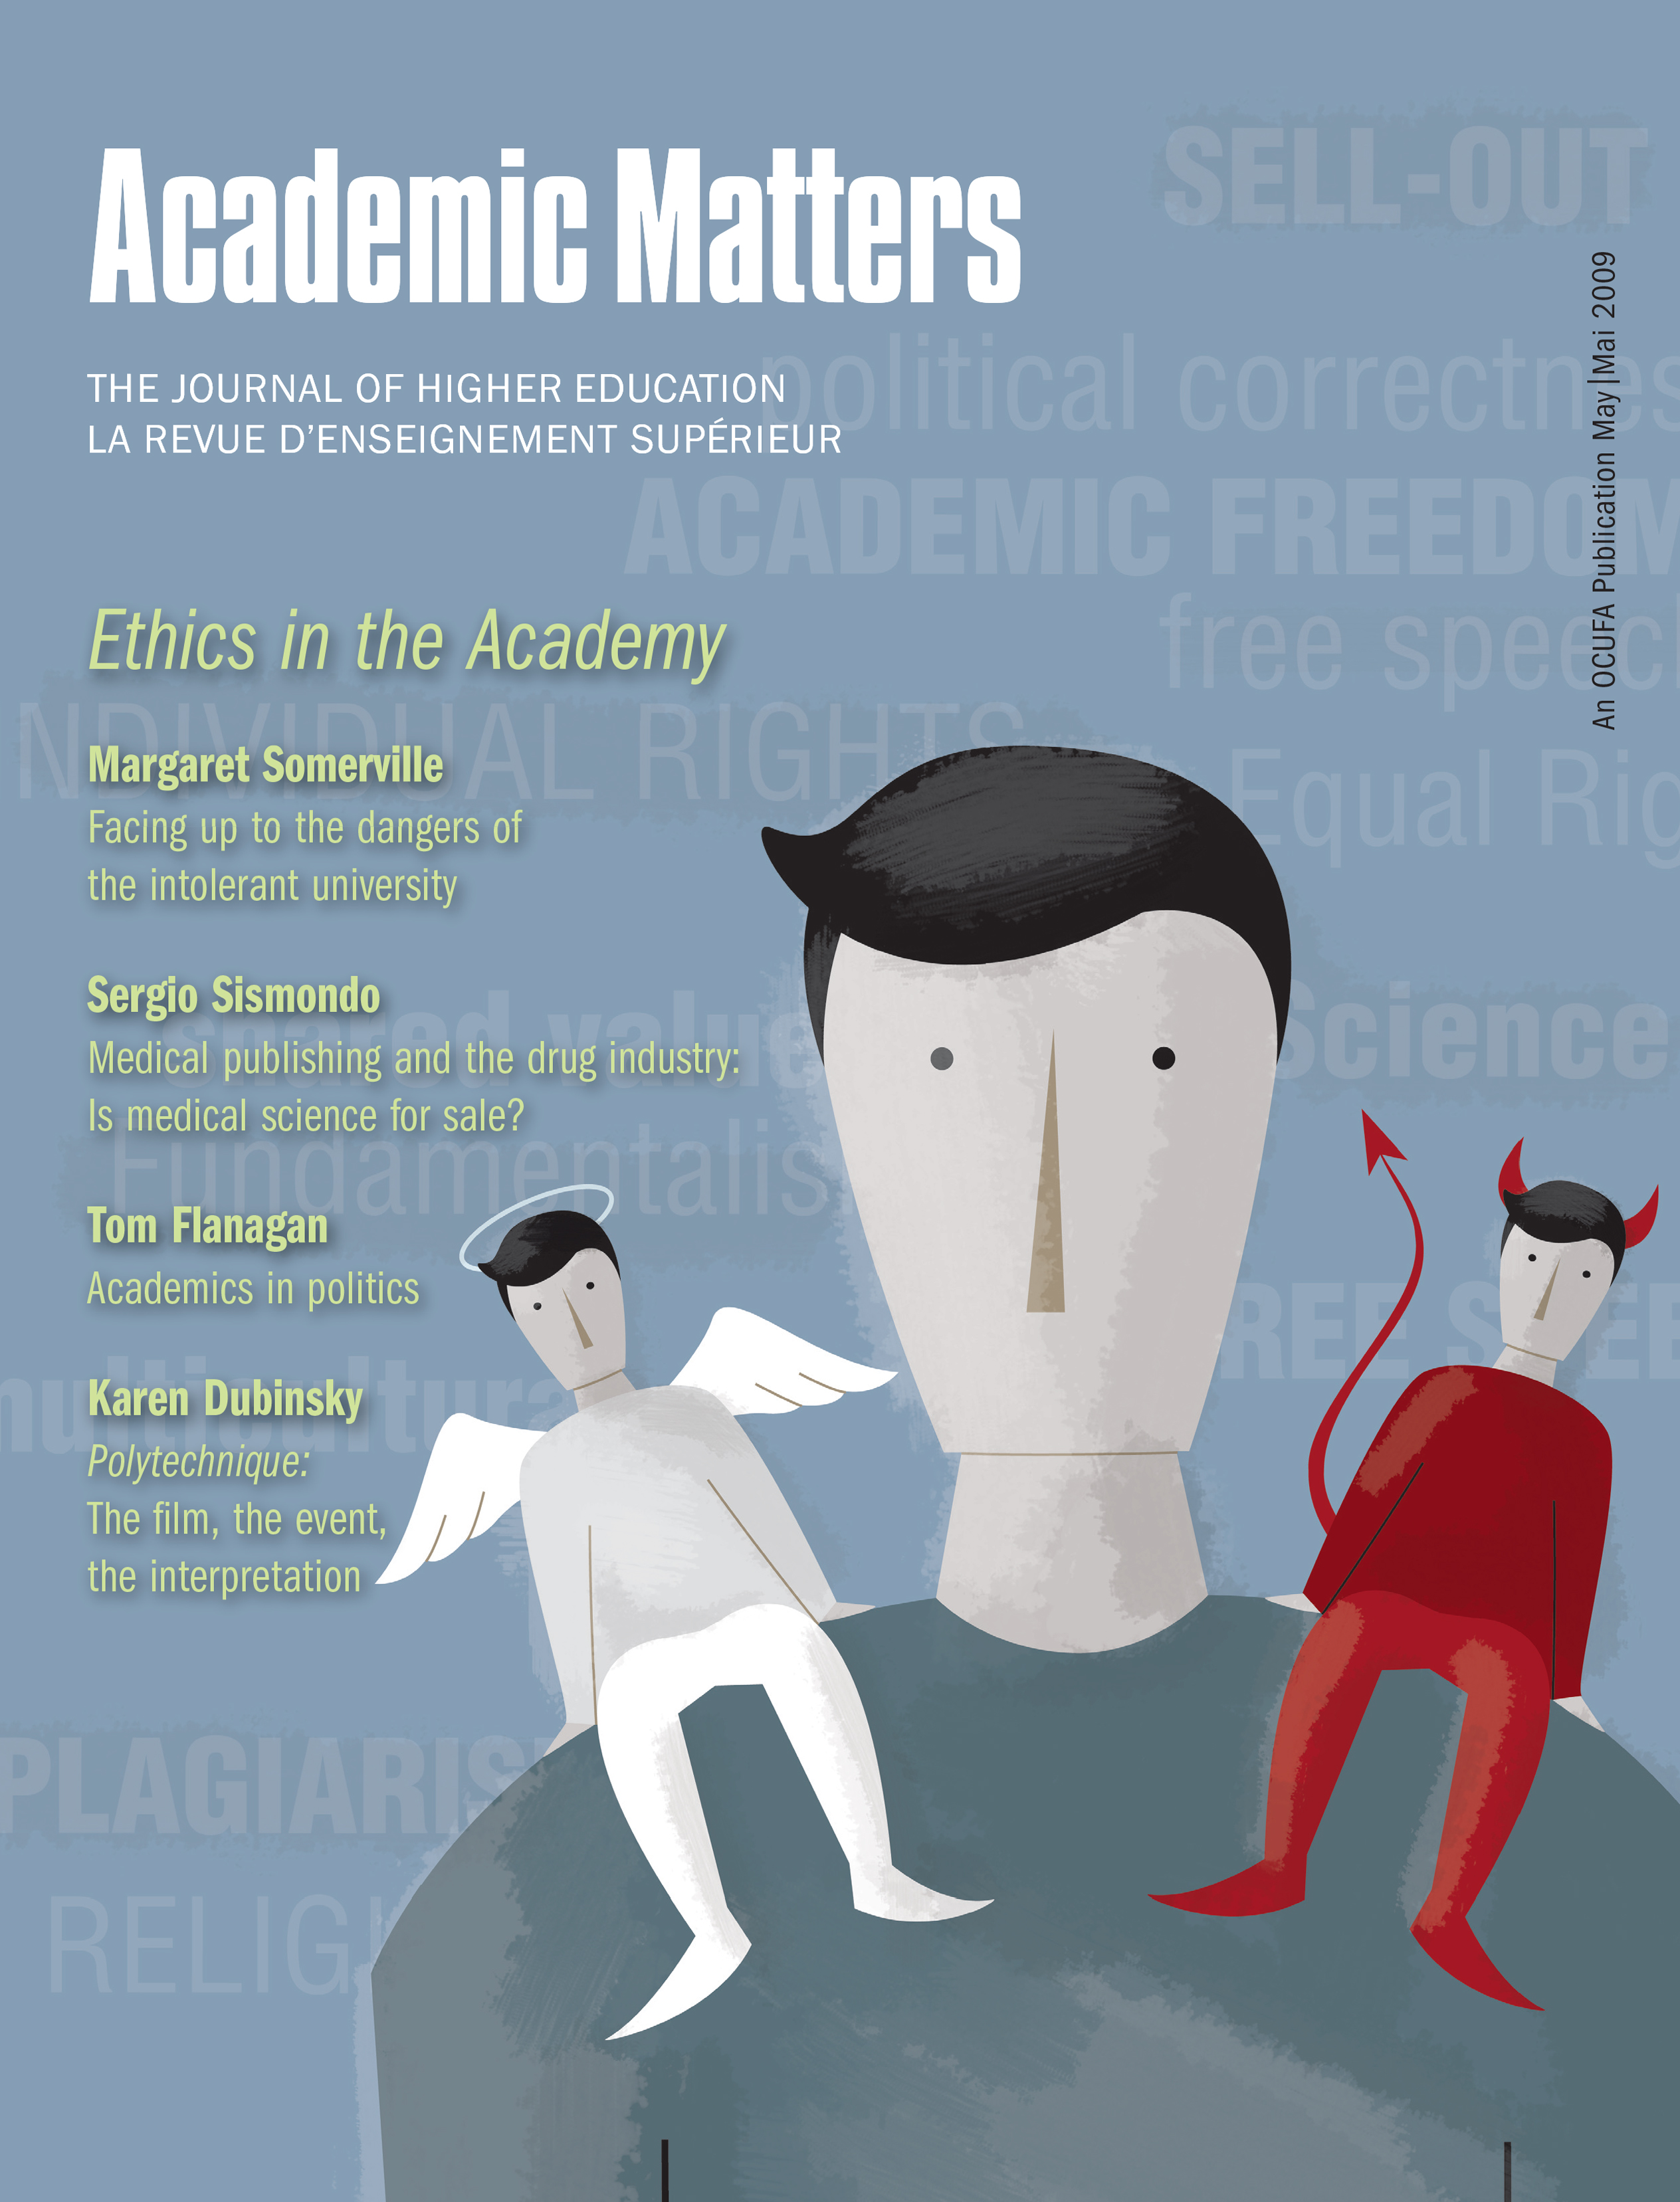 articles about ethics in education